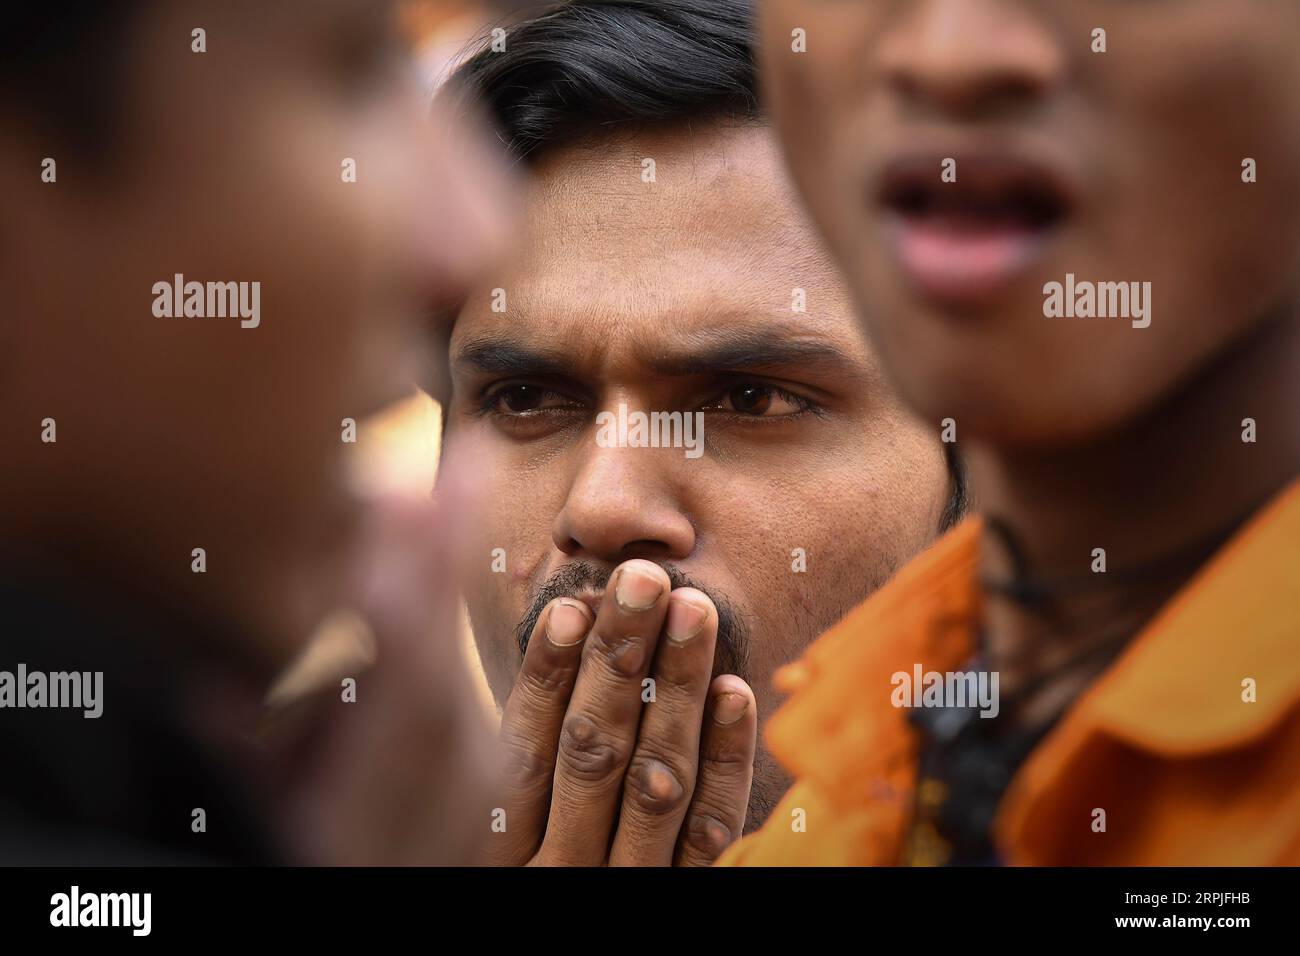 191208 -- NEW DELHI, Dec. 8, 2019 -- Relatives of victims of a fire incident wait outside a mortuary in New Delhi, India, Dec. 8, 2019. At least 43 people died and more than 50 injured in the fire incident. The injured are undergoing medical treatment at four different hospitals. The fire broke out in north Delhi s Filmistan area in the early hours of Sunday when more than 100 people, mostly labourers, were asleep inside a four-storey building. Str/Xinhua INDIA-NEW DELHI-FIRE VICTIMS-RELATIVES Stringer PUBLICATIONxNOTxINxCHN Stock Photo